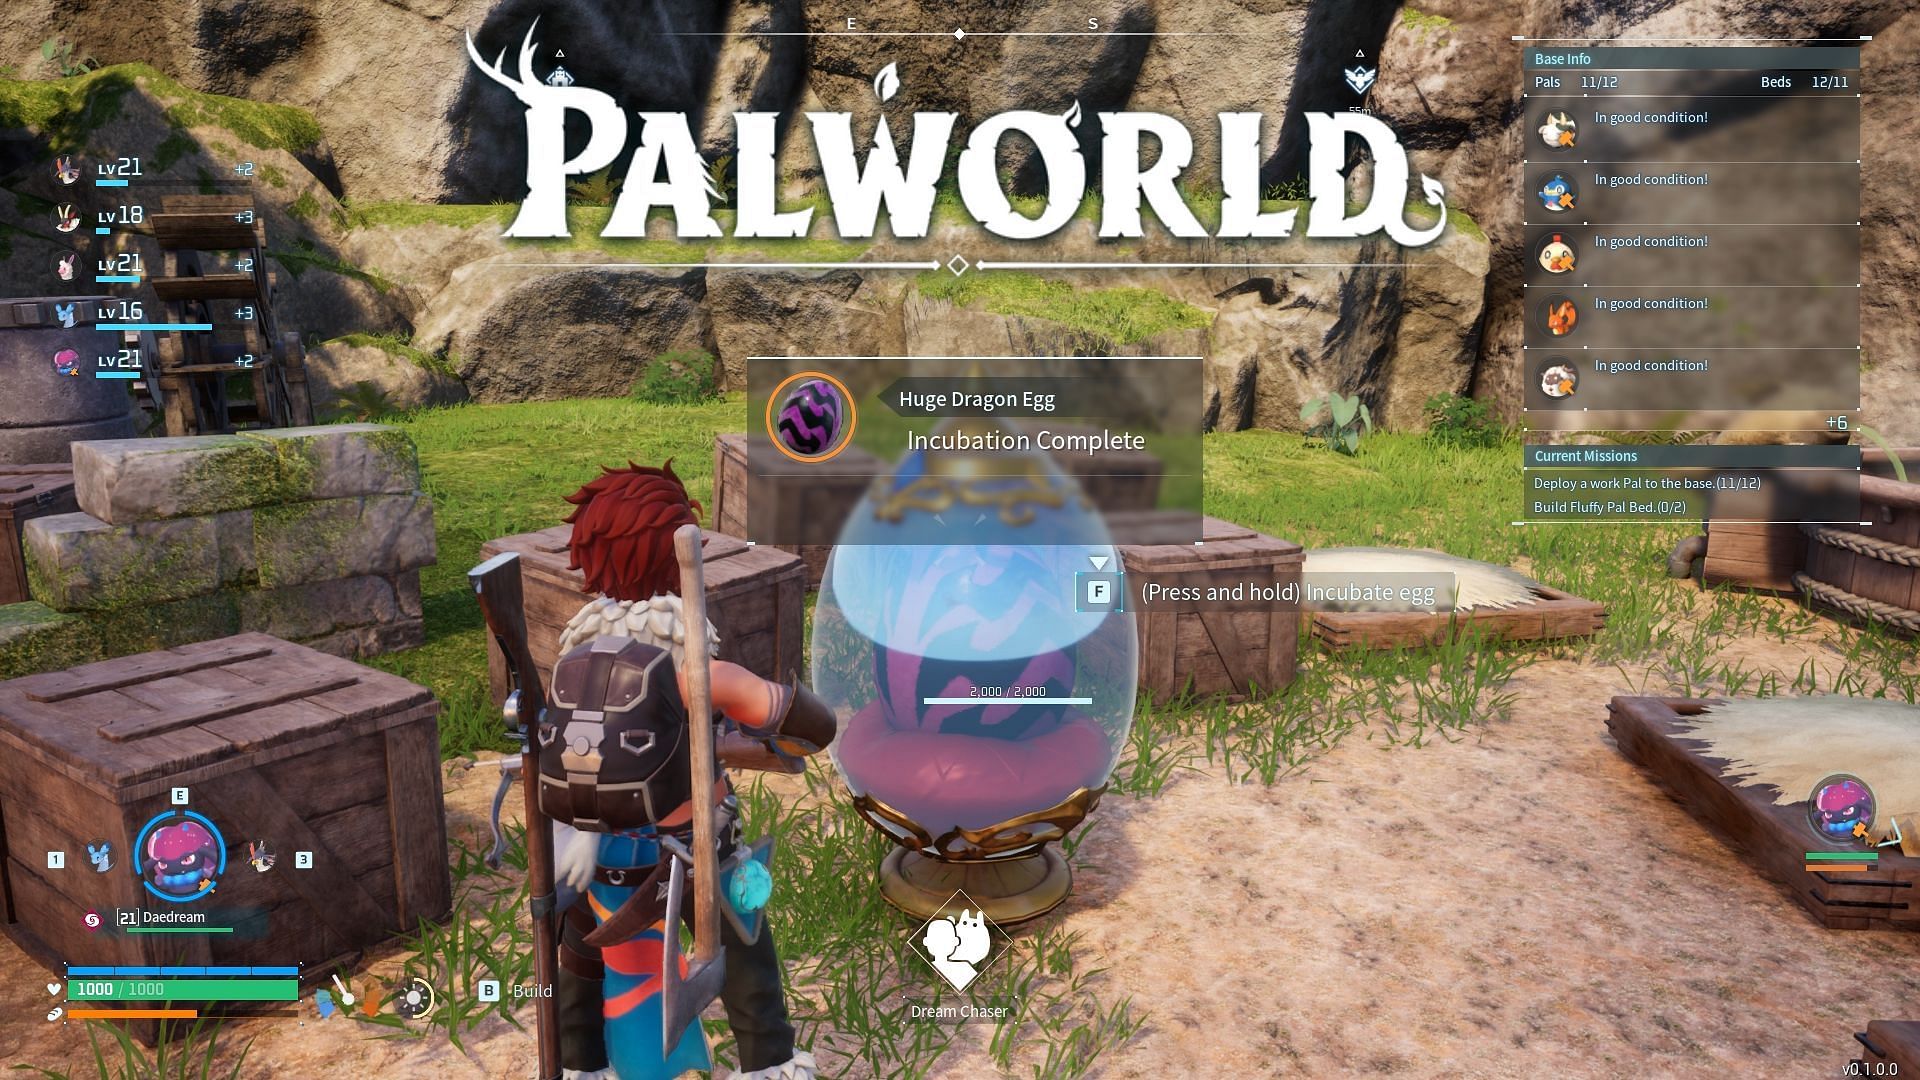 How to get Huge Dragon Egg in Palworld